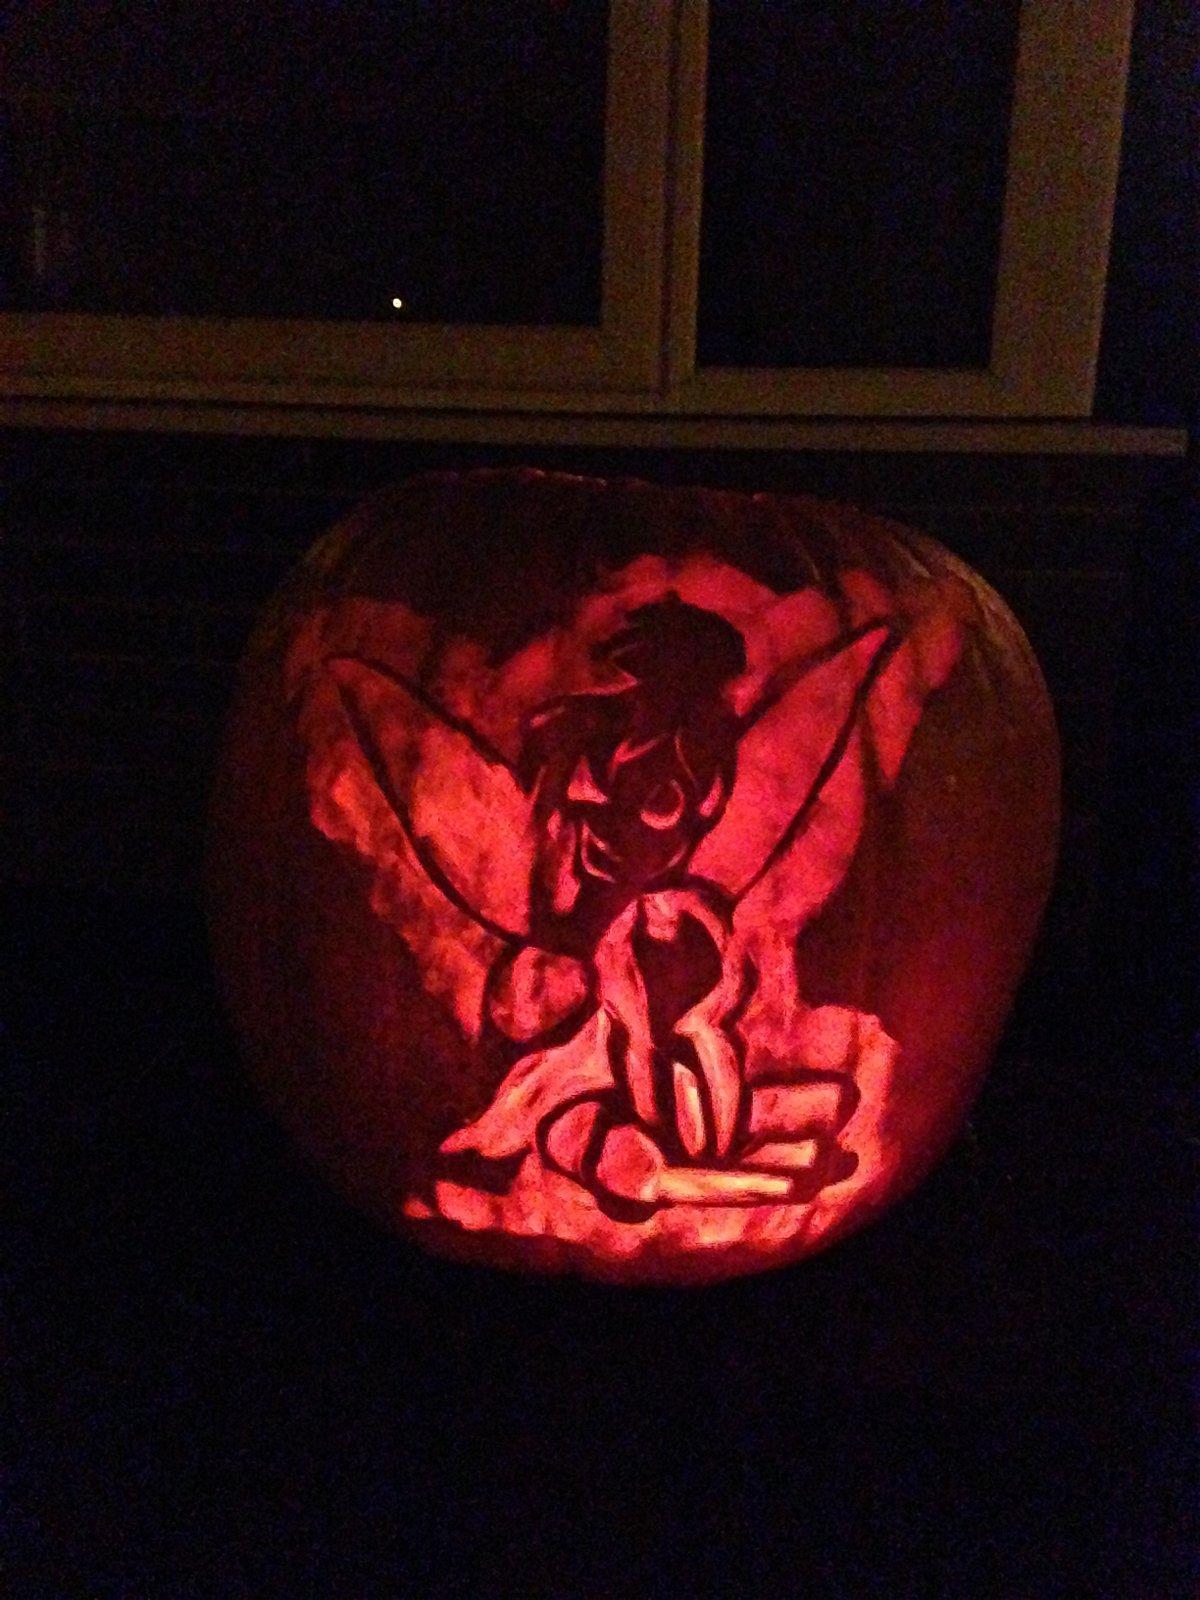 Tinkerbell pumpkin carving by Michael Adkins, from Marlow.